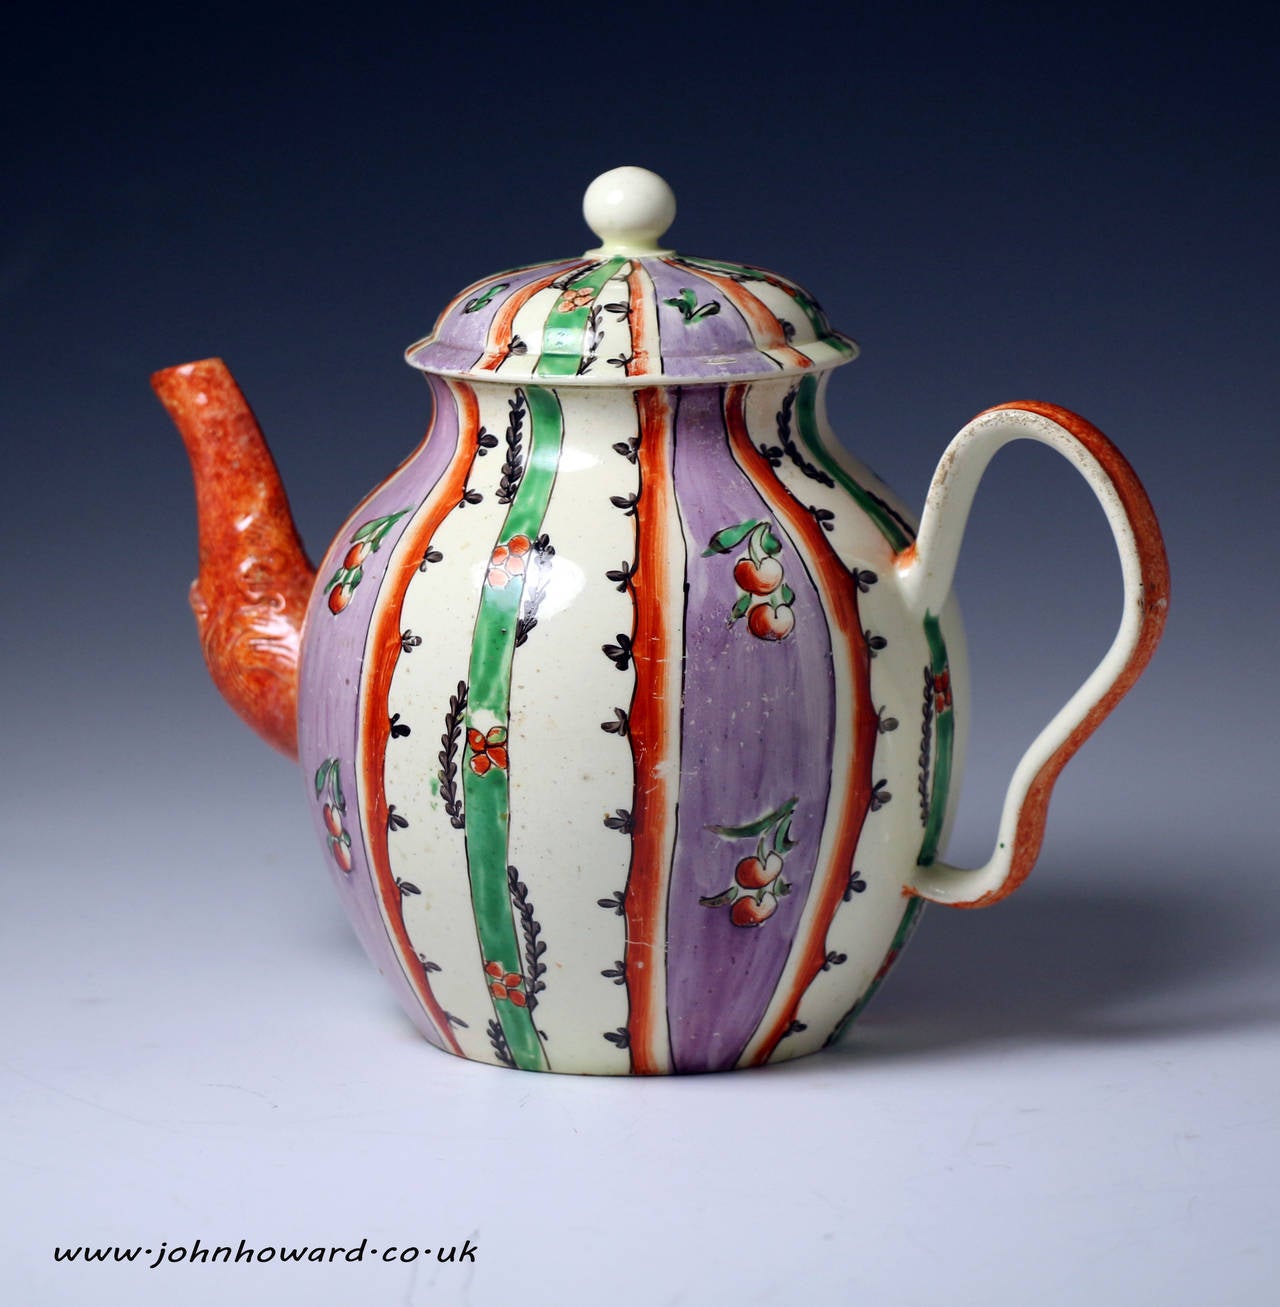 A rare and highly decorative globe shaped Chintz patterned creamware teapot. 
The teapot is decorated with leaves, flowers and cherries within green, mauve and cream stripes. 
The ogee shaped handle and relief decorated spout are decorated in a